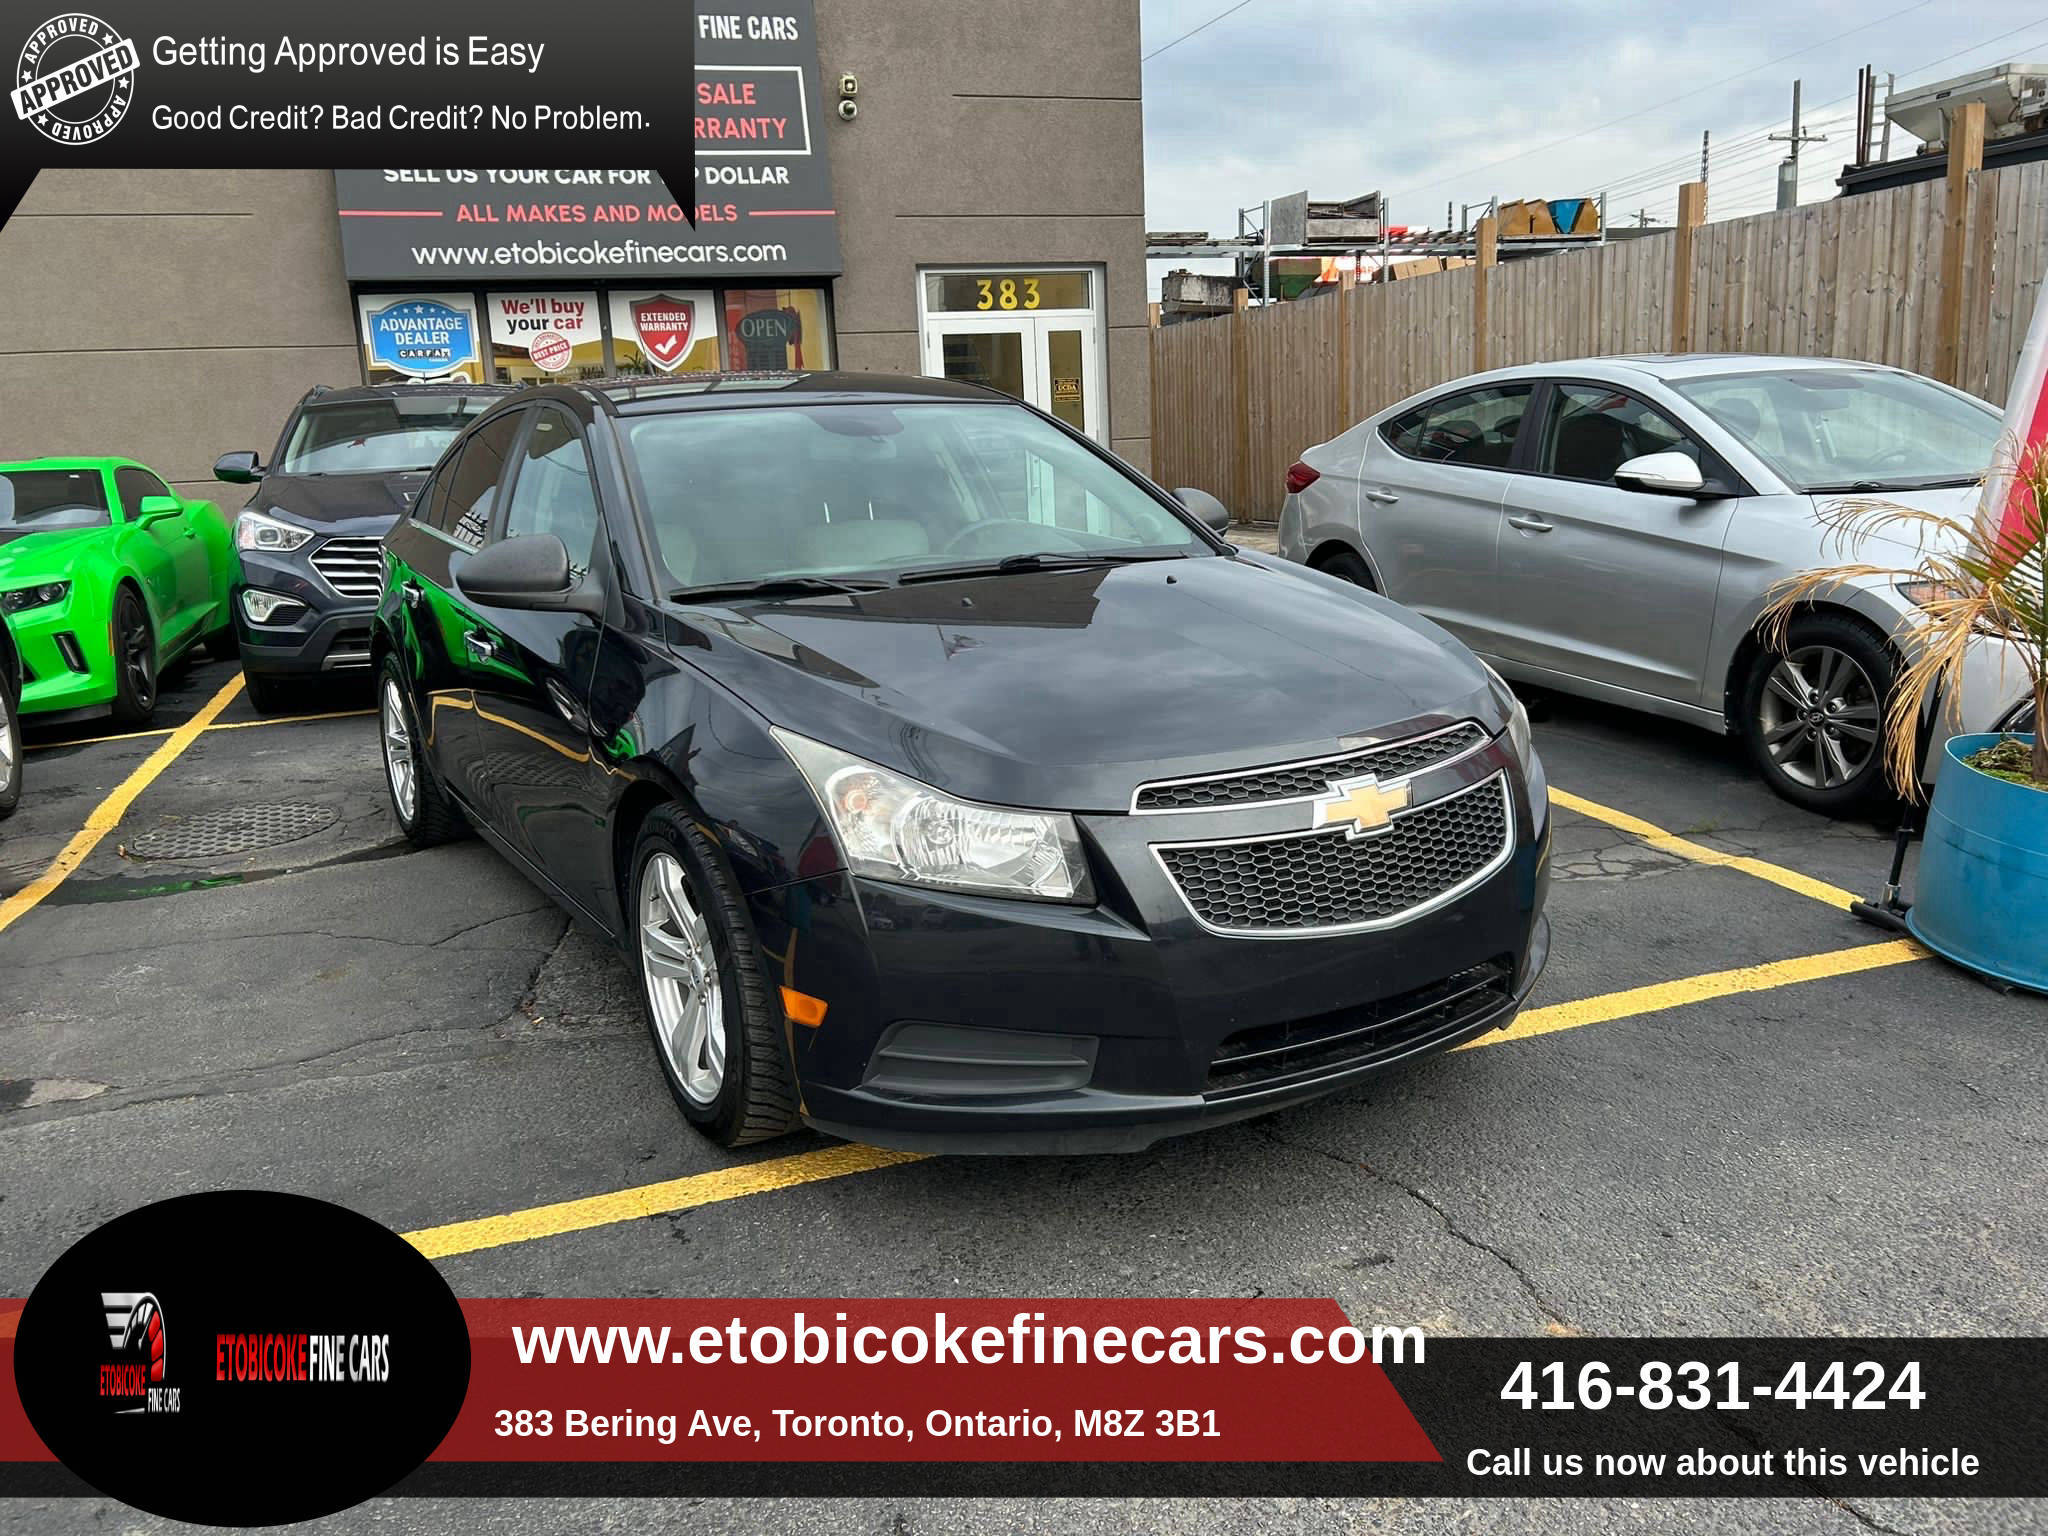 2012 Chevrolet Cruze 4dr Sdn LS automatic FULLY CERTIFIED WITH FREE WAR